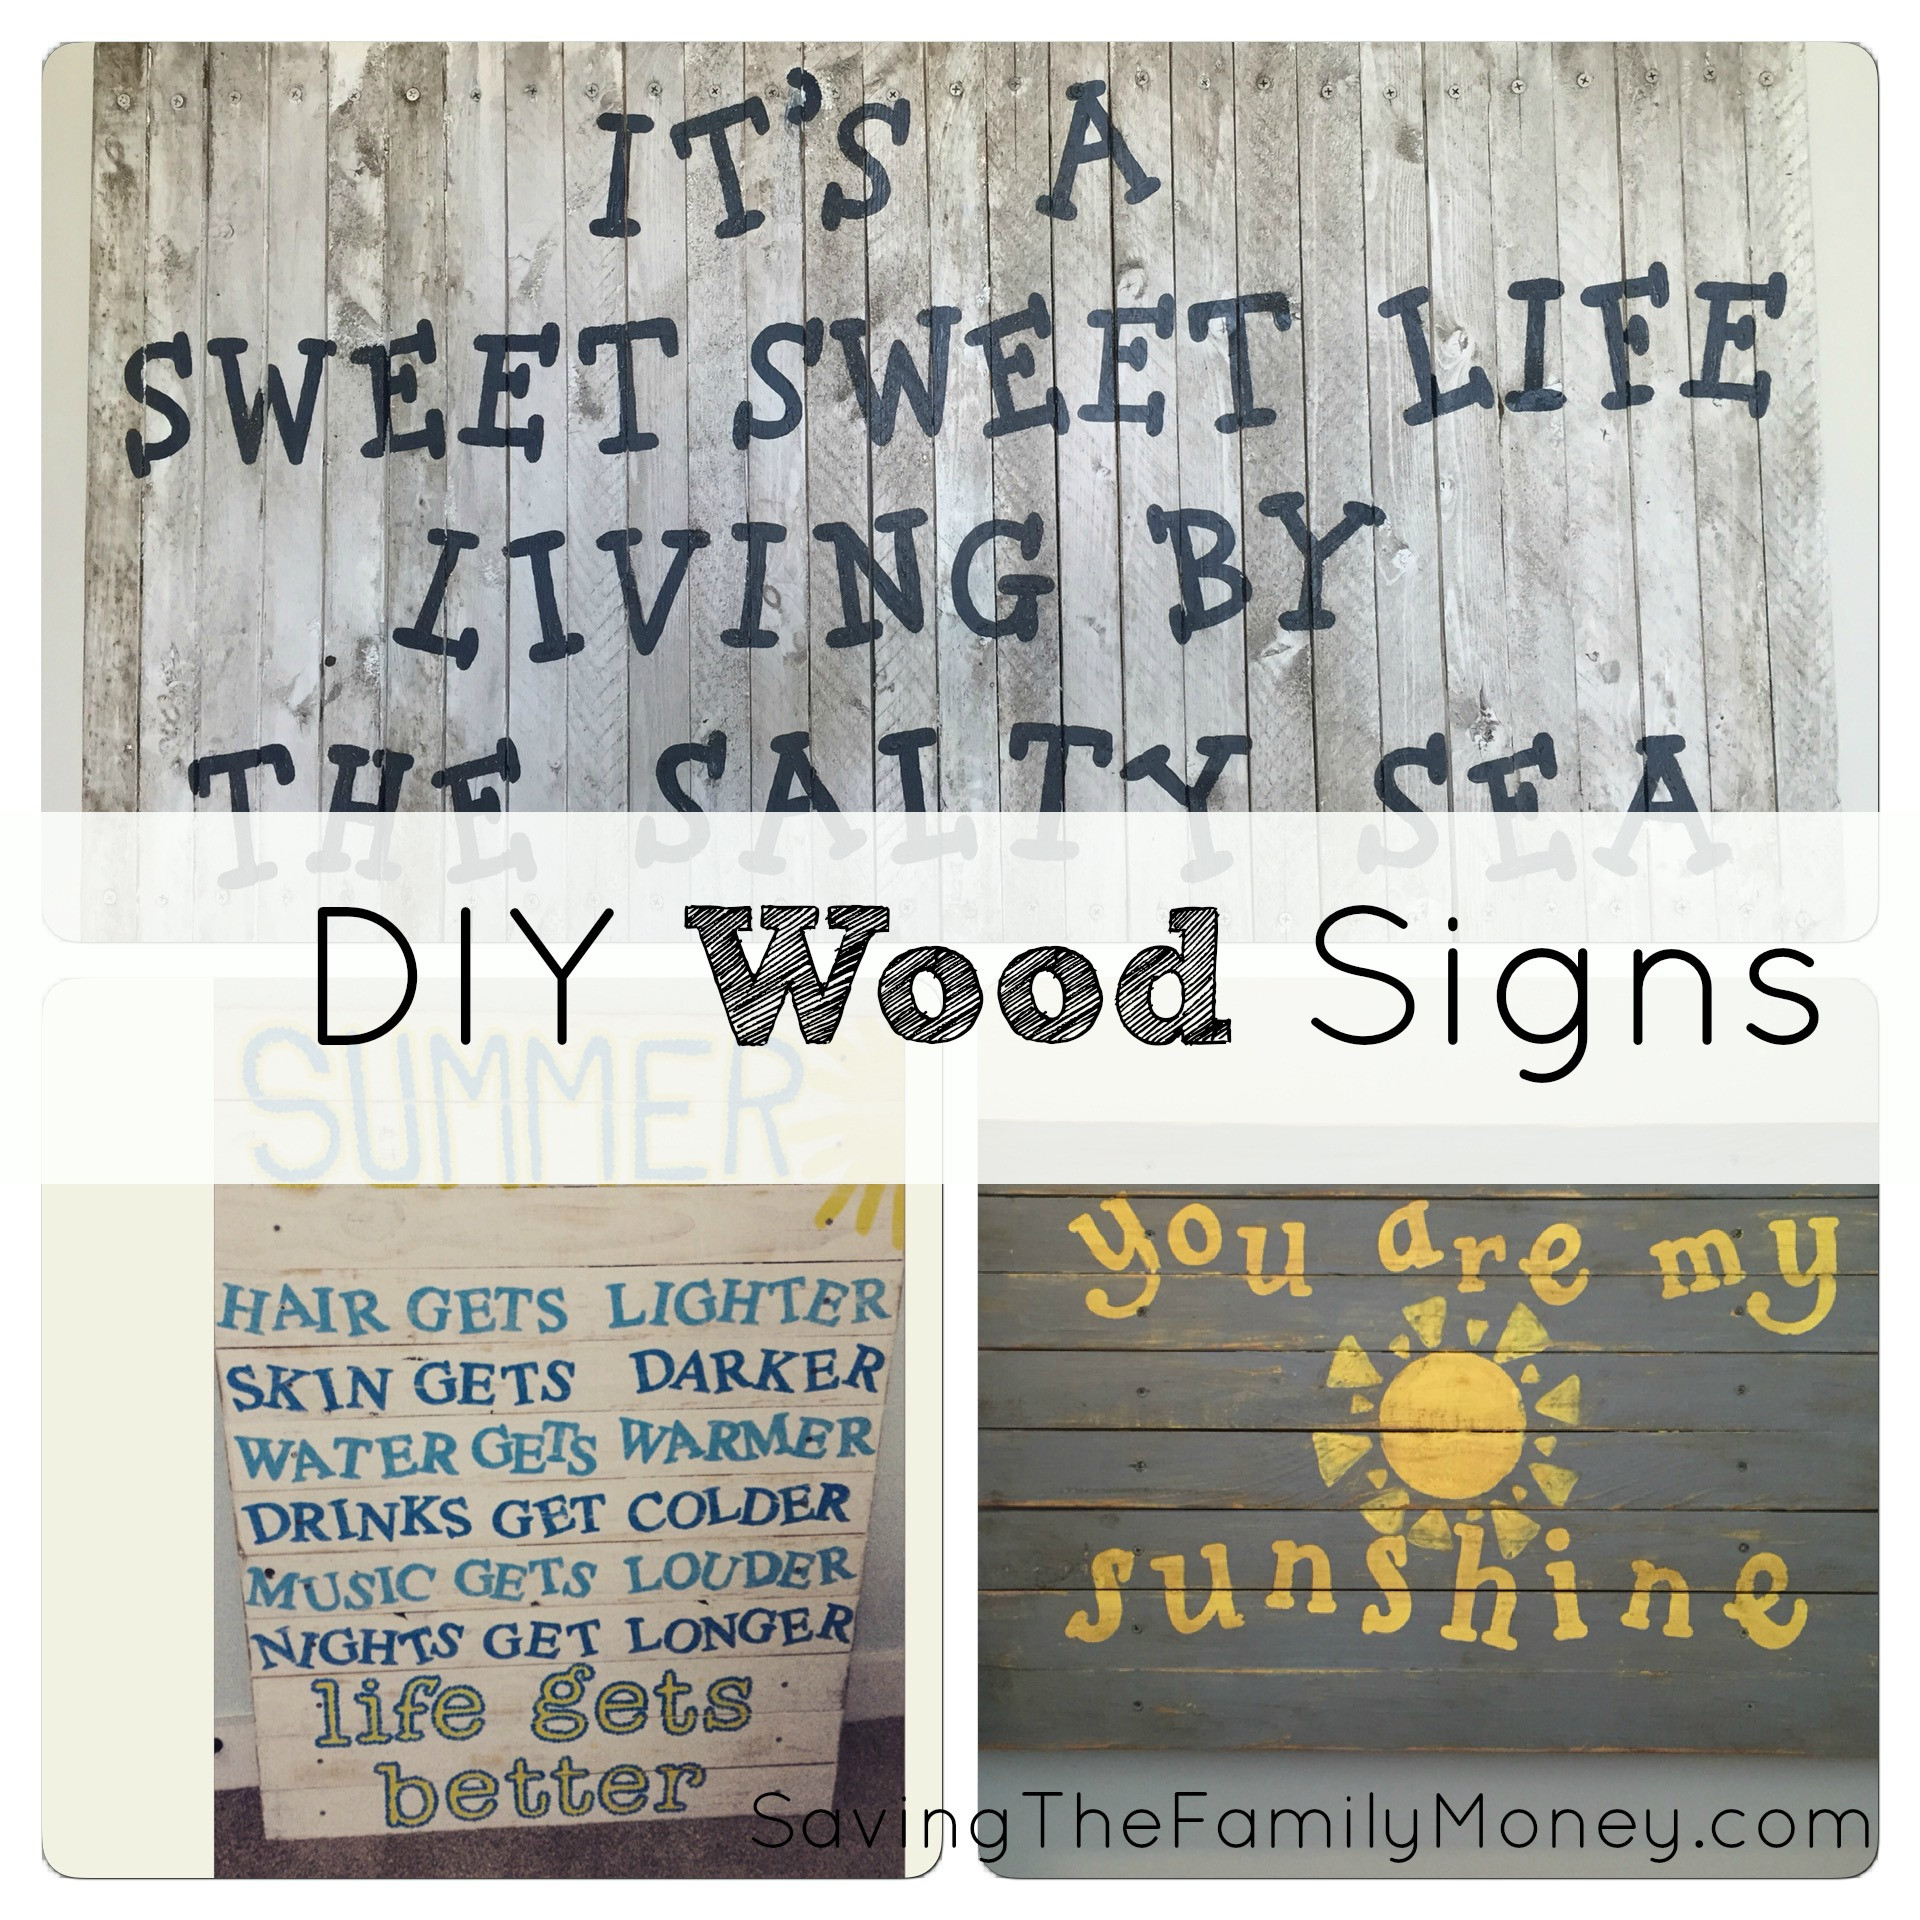 DIY Signs On Wood
 DIY Wood Signs – Saving The Family Money